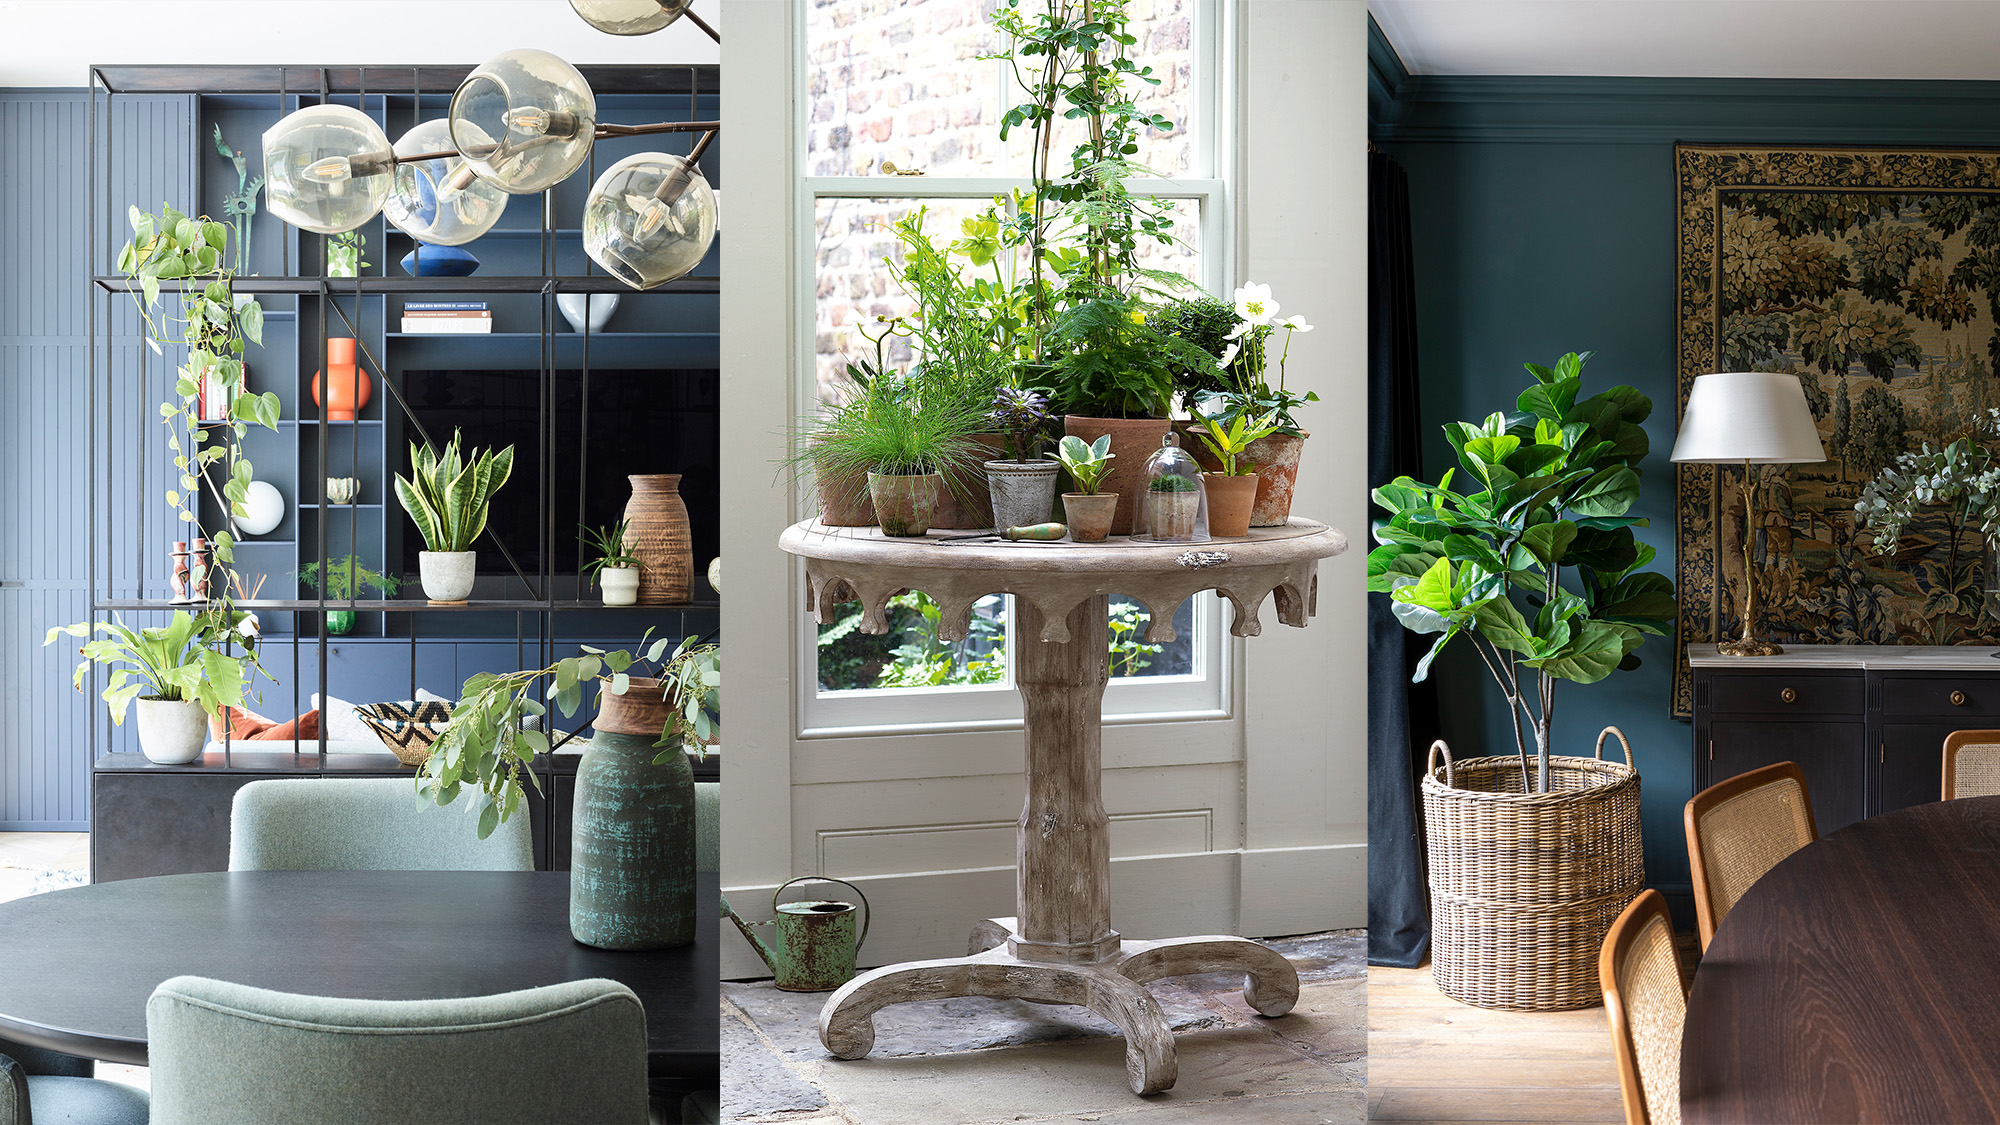 Transform Your Home with Plants and Flowers – An Exquisite Interior Design